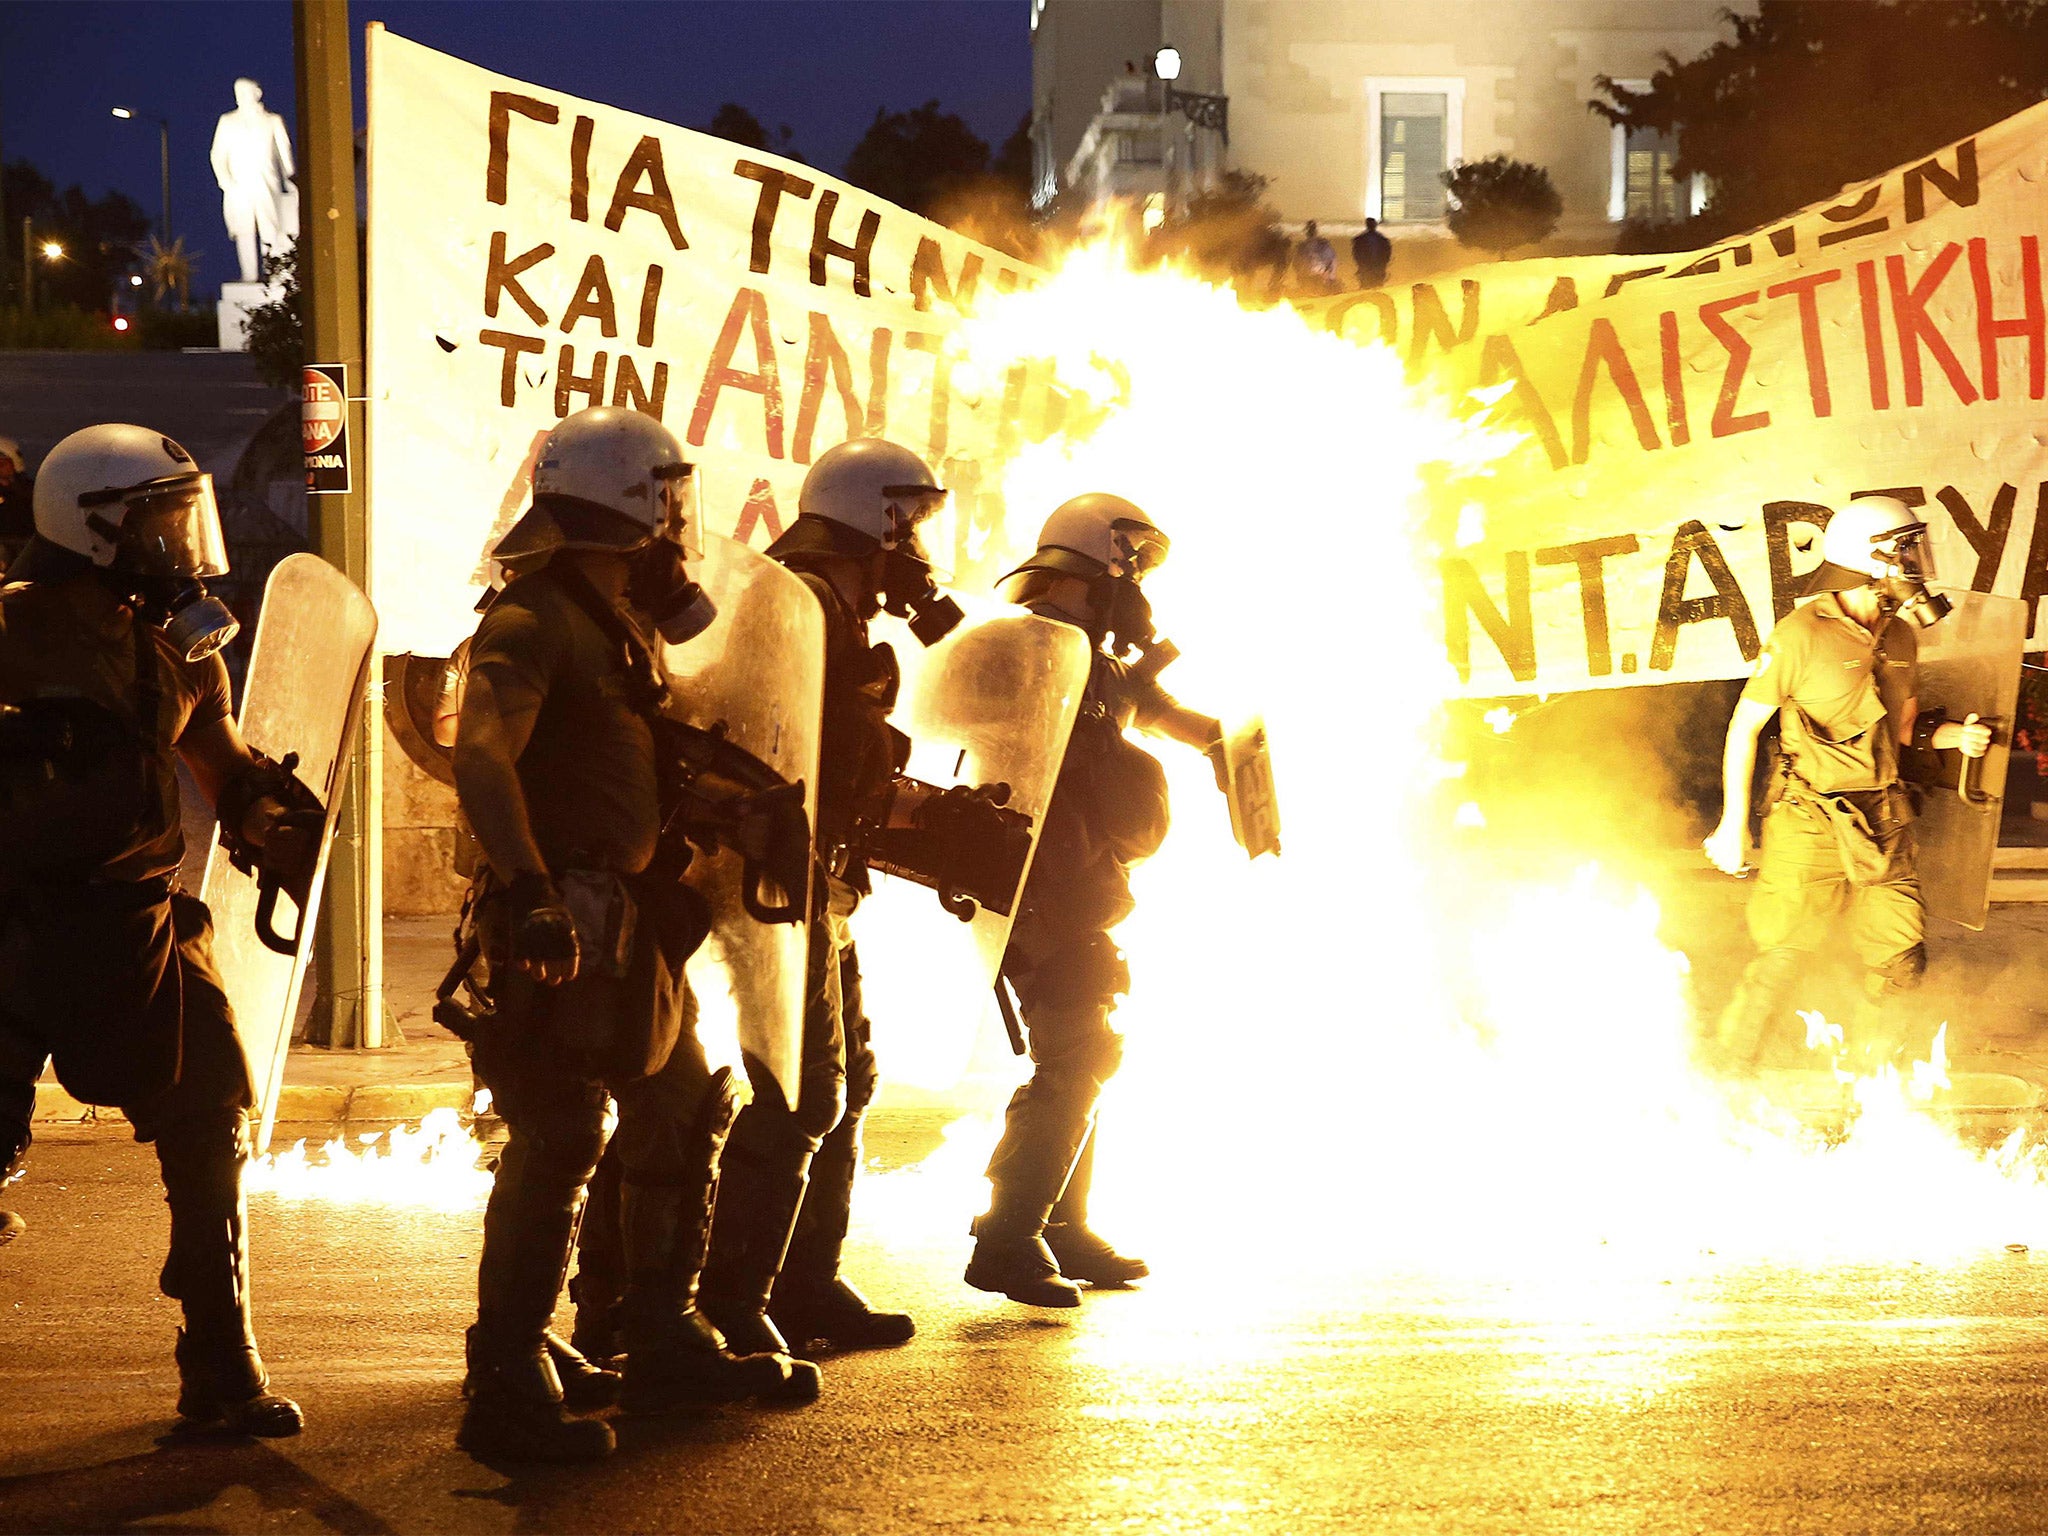 Riot police stand among petrol bombs thrown by anti-austerity demonstrators in front of the Greek parliament in Athens on Wednesday night